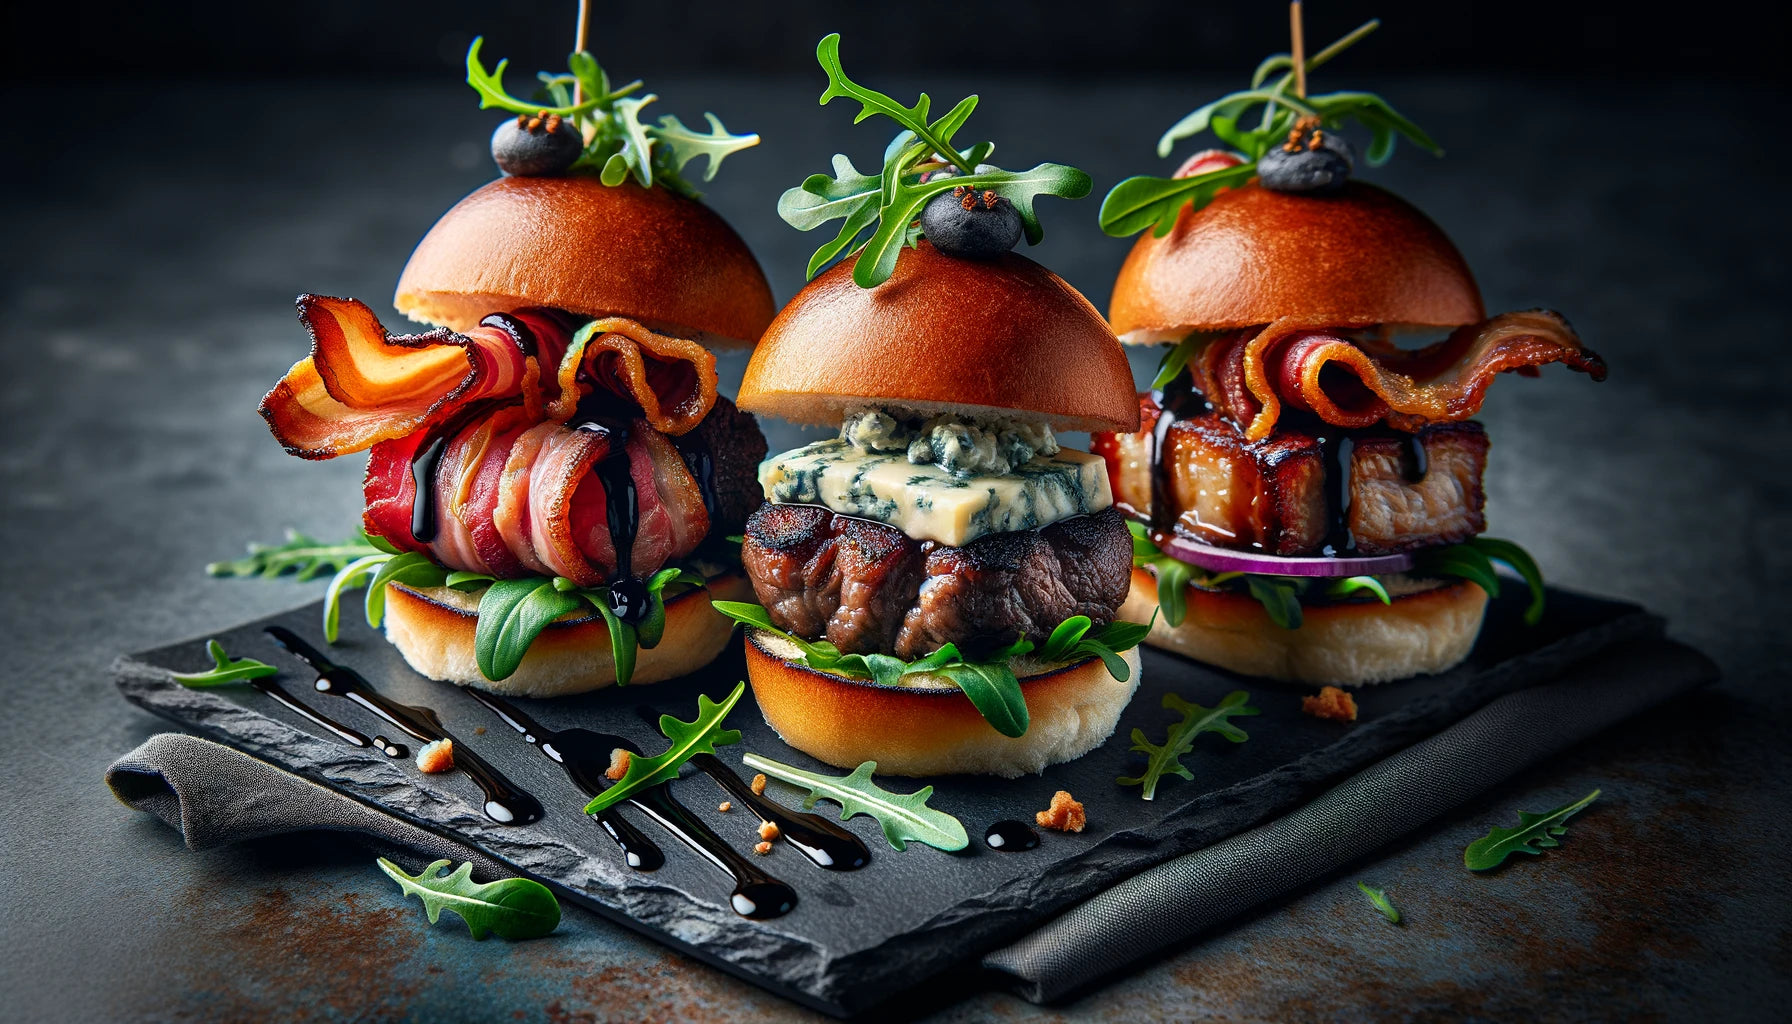 Wagyu Beef, Pork Belly, and Blue Cheese Sliders